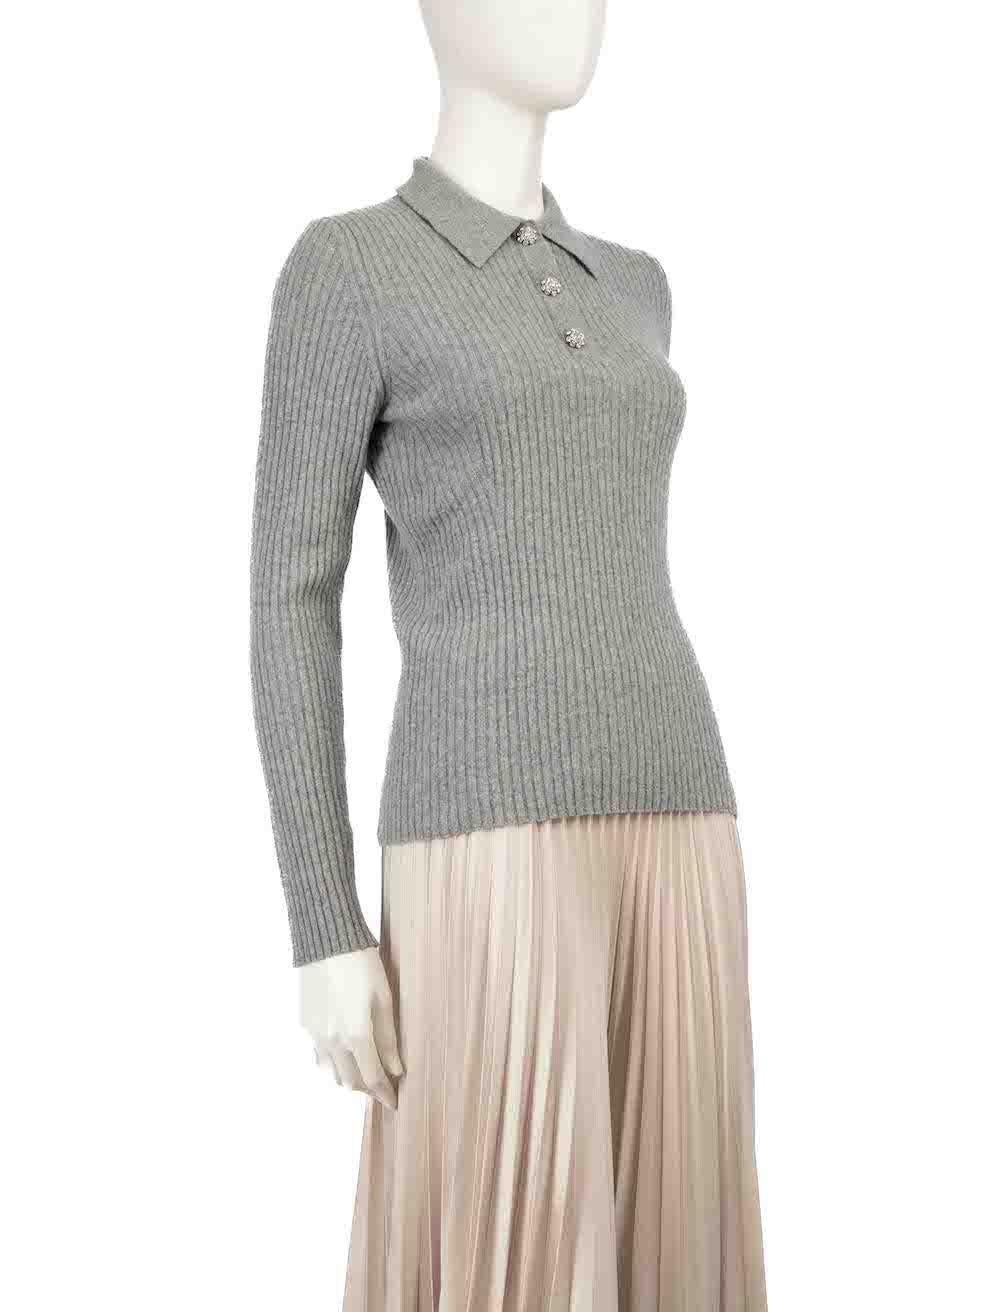 CONDITION is Very good. Minimal wear to jumper is evident. Minimal pilling to overall material especially around the underarms Minimal discolouration to right cuff on this used Ganni designer resale item.
 
 
 
 Details
 
 
 Grey
 
 Wool
 
 Knit